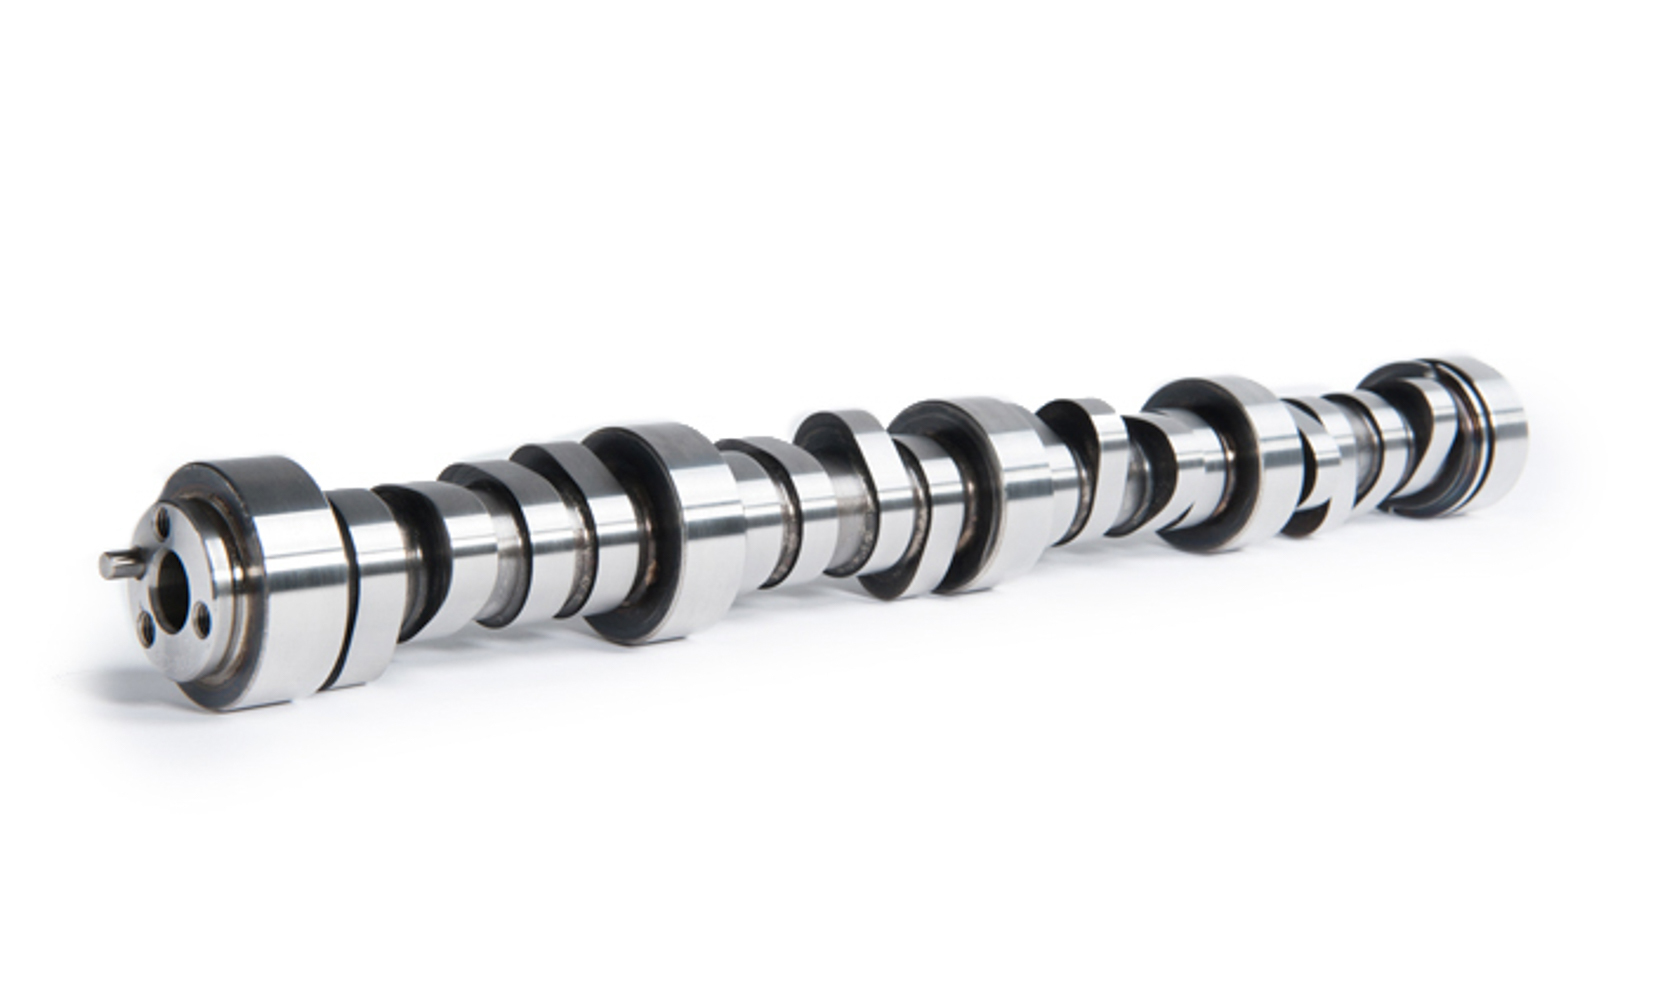 Cam Motion 03-01-0053 Supercharger LS-Series Hydraulic Roller Camshaft 595 / 587 Lift